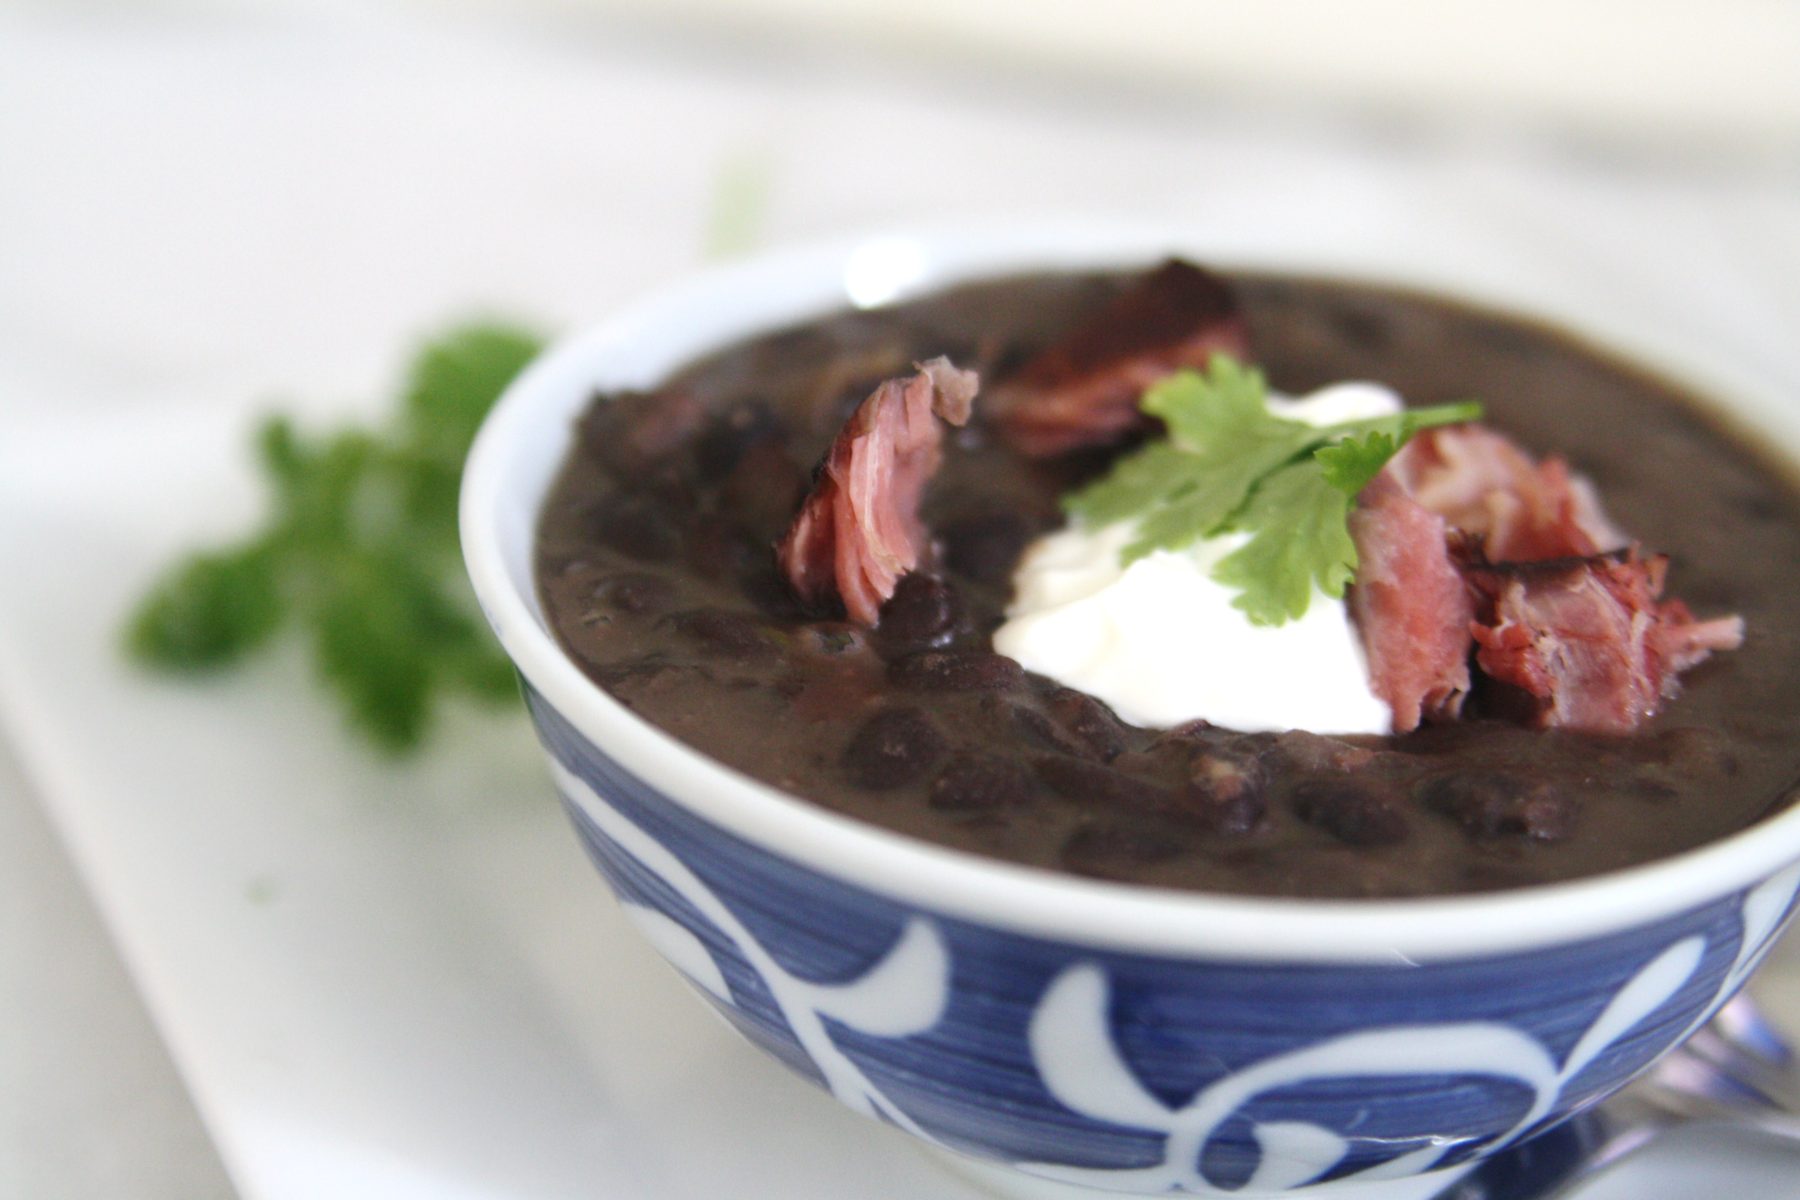 Cuban Black Bean Soup with Smoked Ham Hock is made with black beans simmered with smoked ham hocks and aromatic ingredients like onions, garlic, bell peppers, and spices. The infusion of flavors creates a deeply satisfying and robust soup.